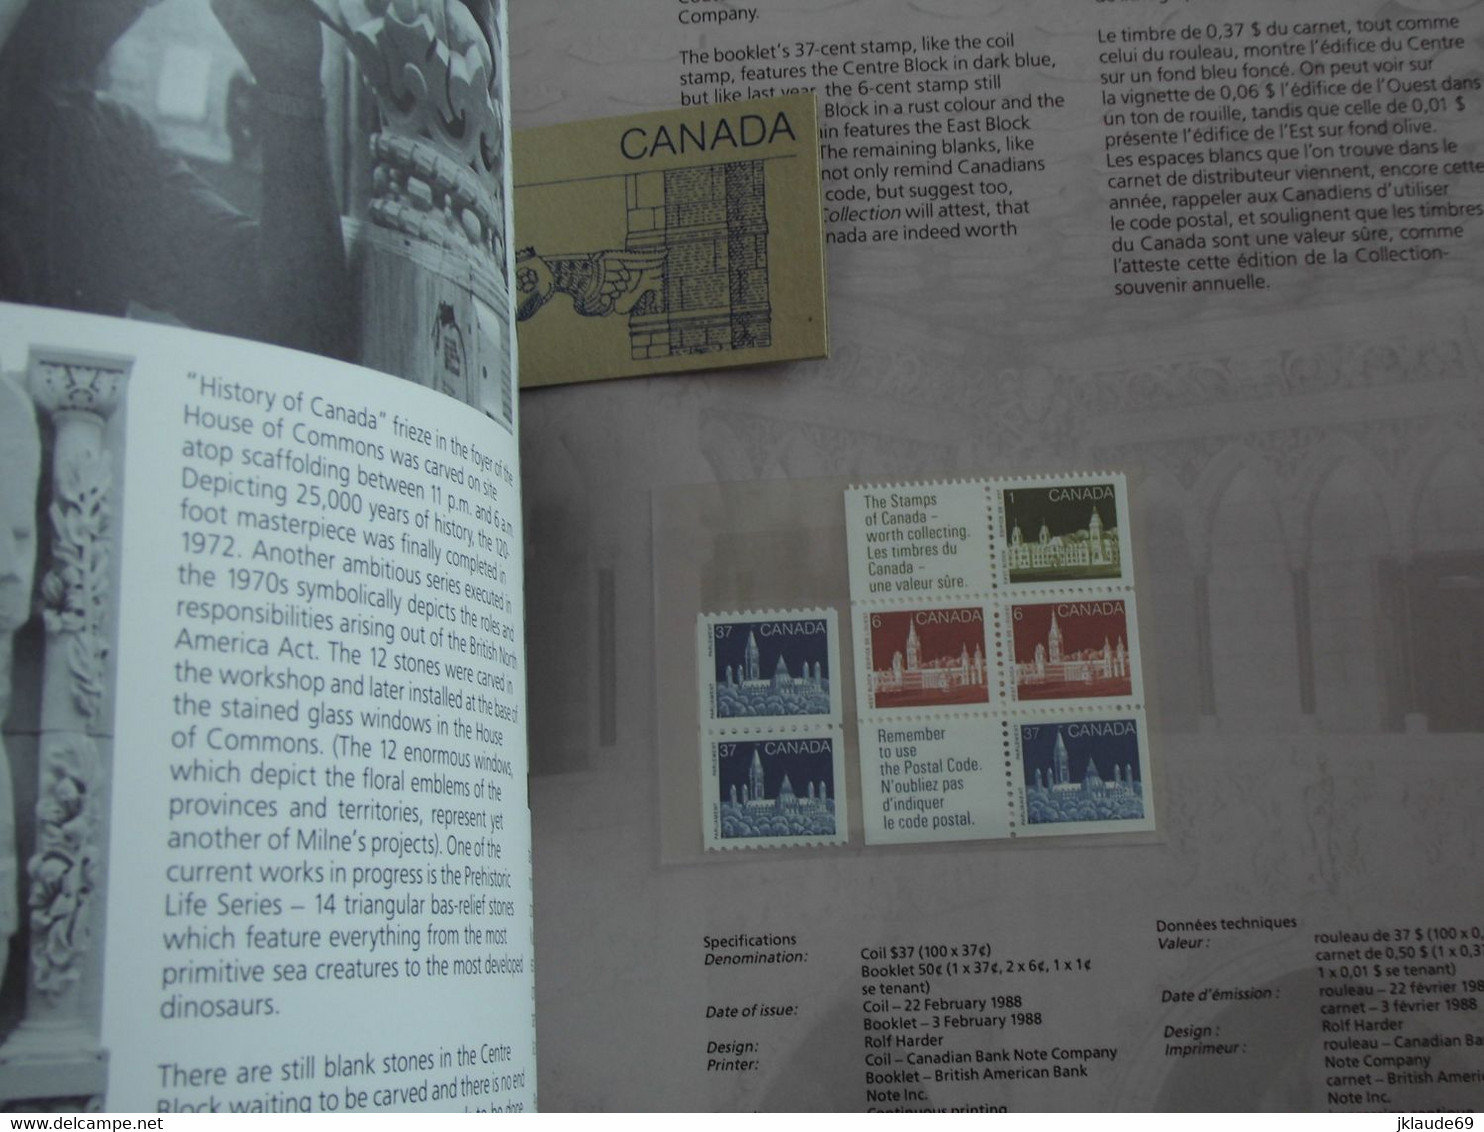 CANADA COLLECTION OF THE POSTAGE STAMPS OF CANADA 1988 LIVRE DE L'ANNEE YEAR BOOK  Complet Avec Timbres Neufs MNH ** - Complete Years